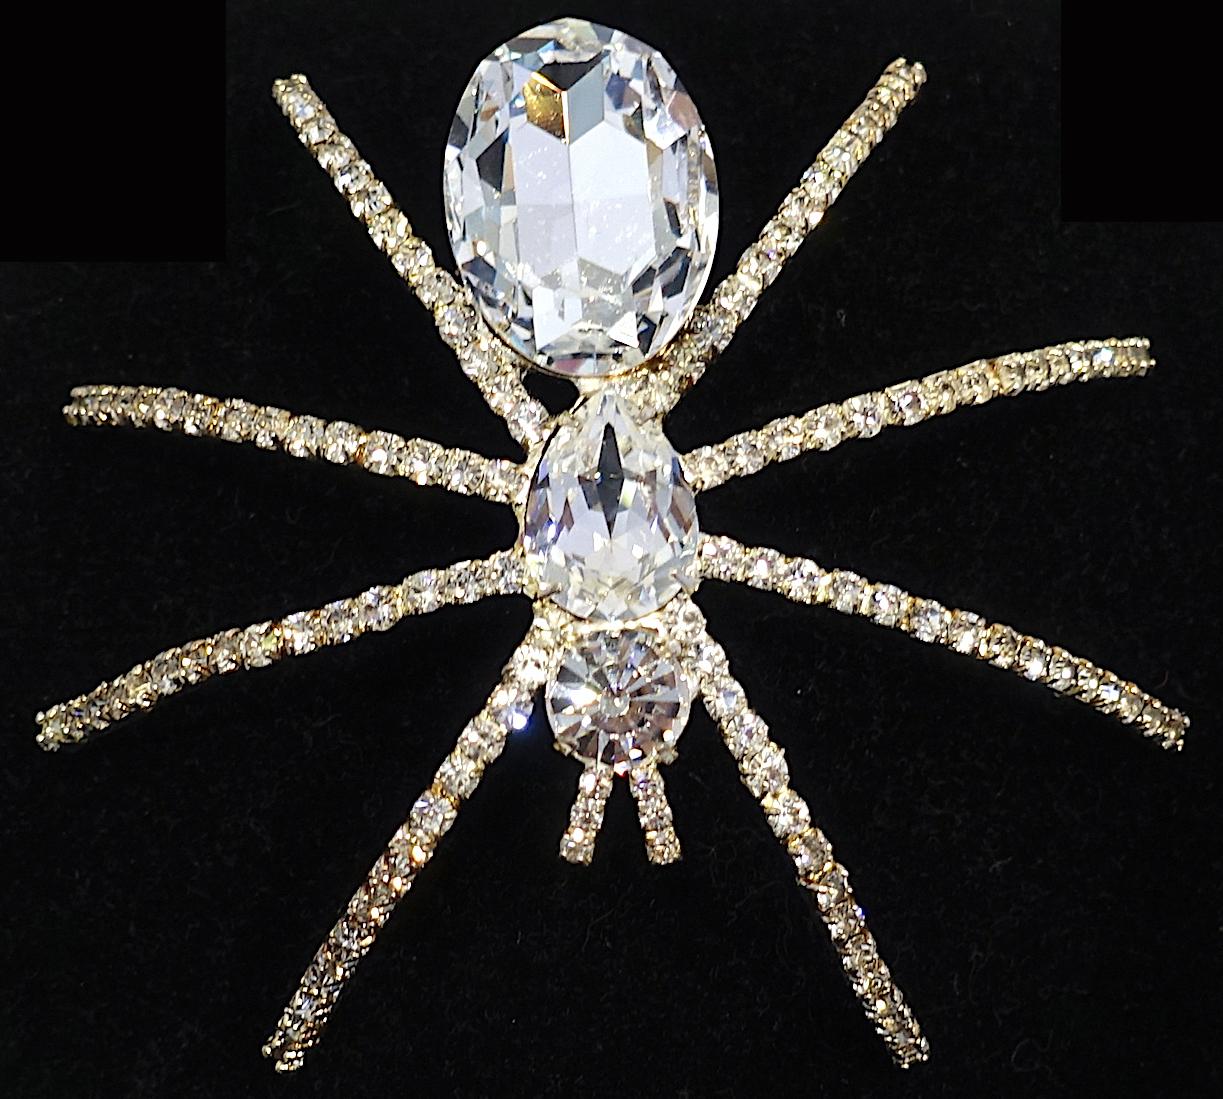 This large spider brooch has clear crystals on its legs and huge faceted crystals running on top its body. It is in a gold tone setting.  This brooch measures 4” x 3-1/2” and in excellent condition.